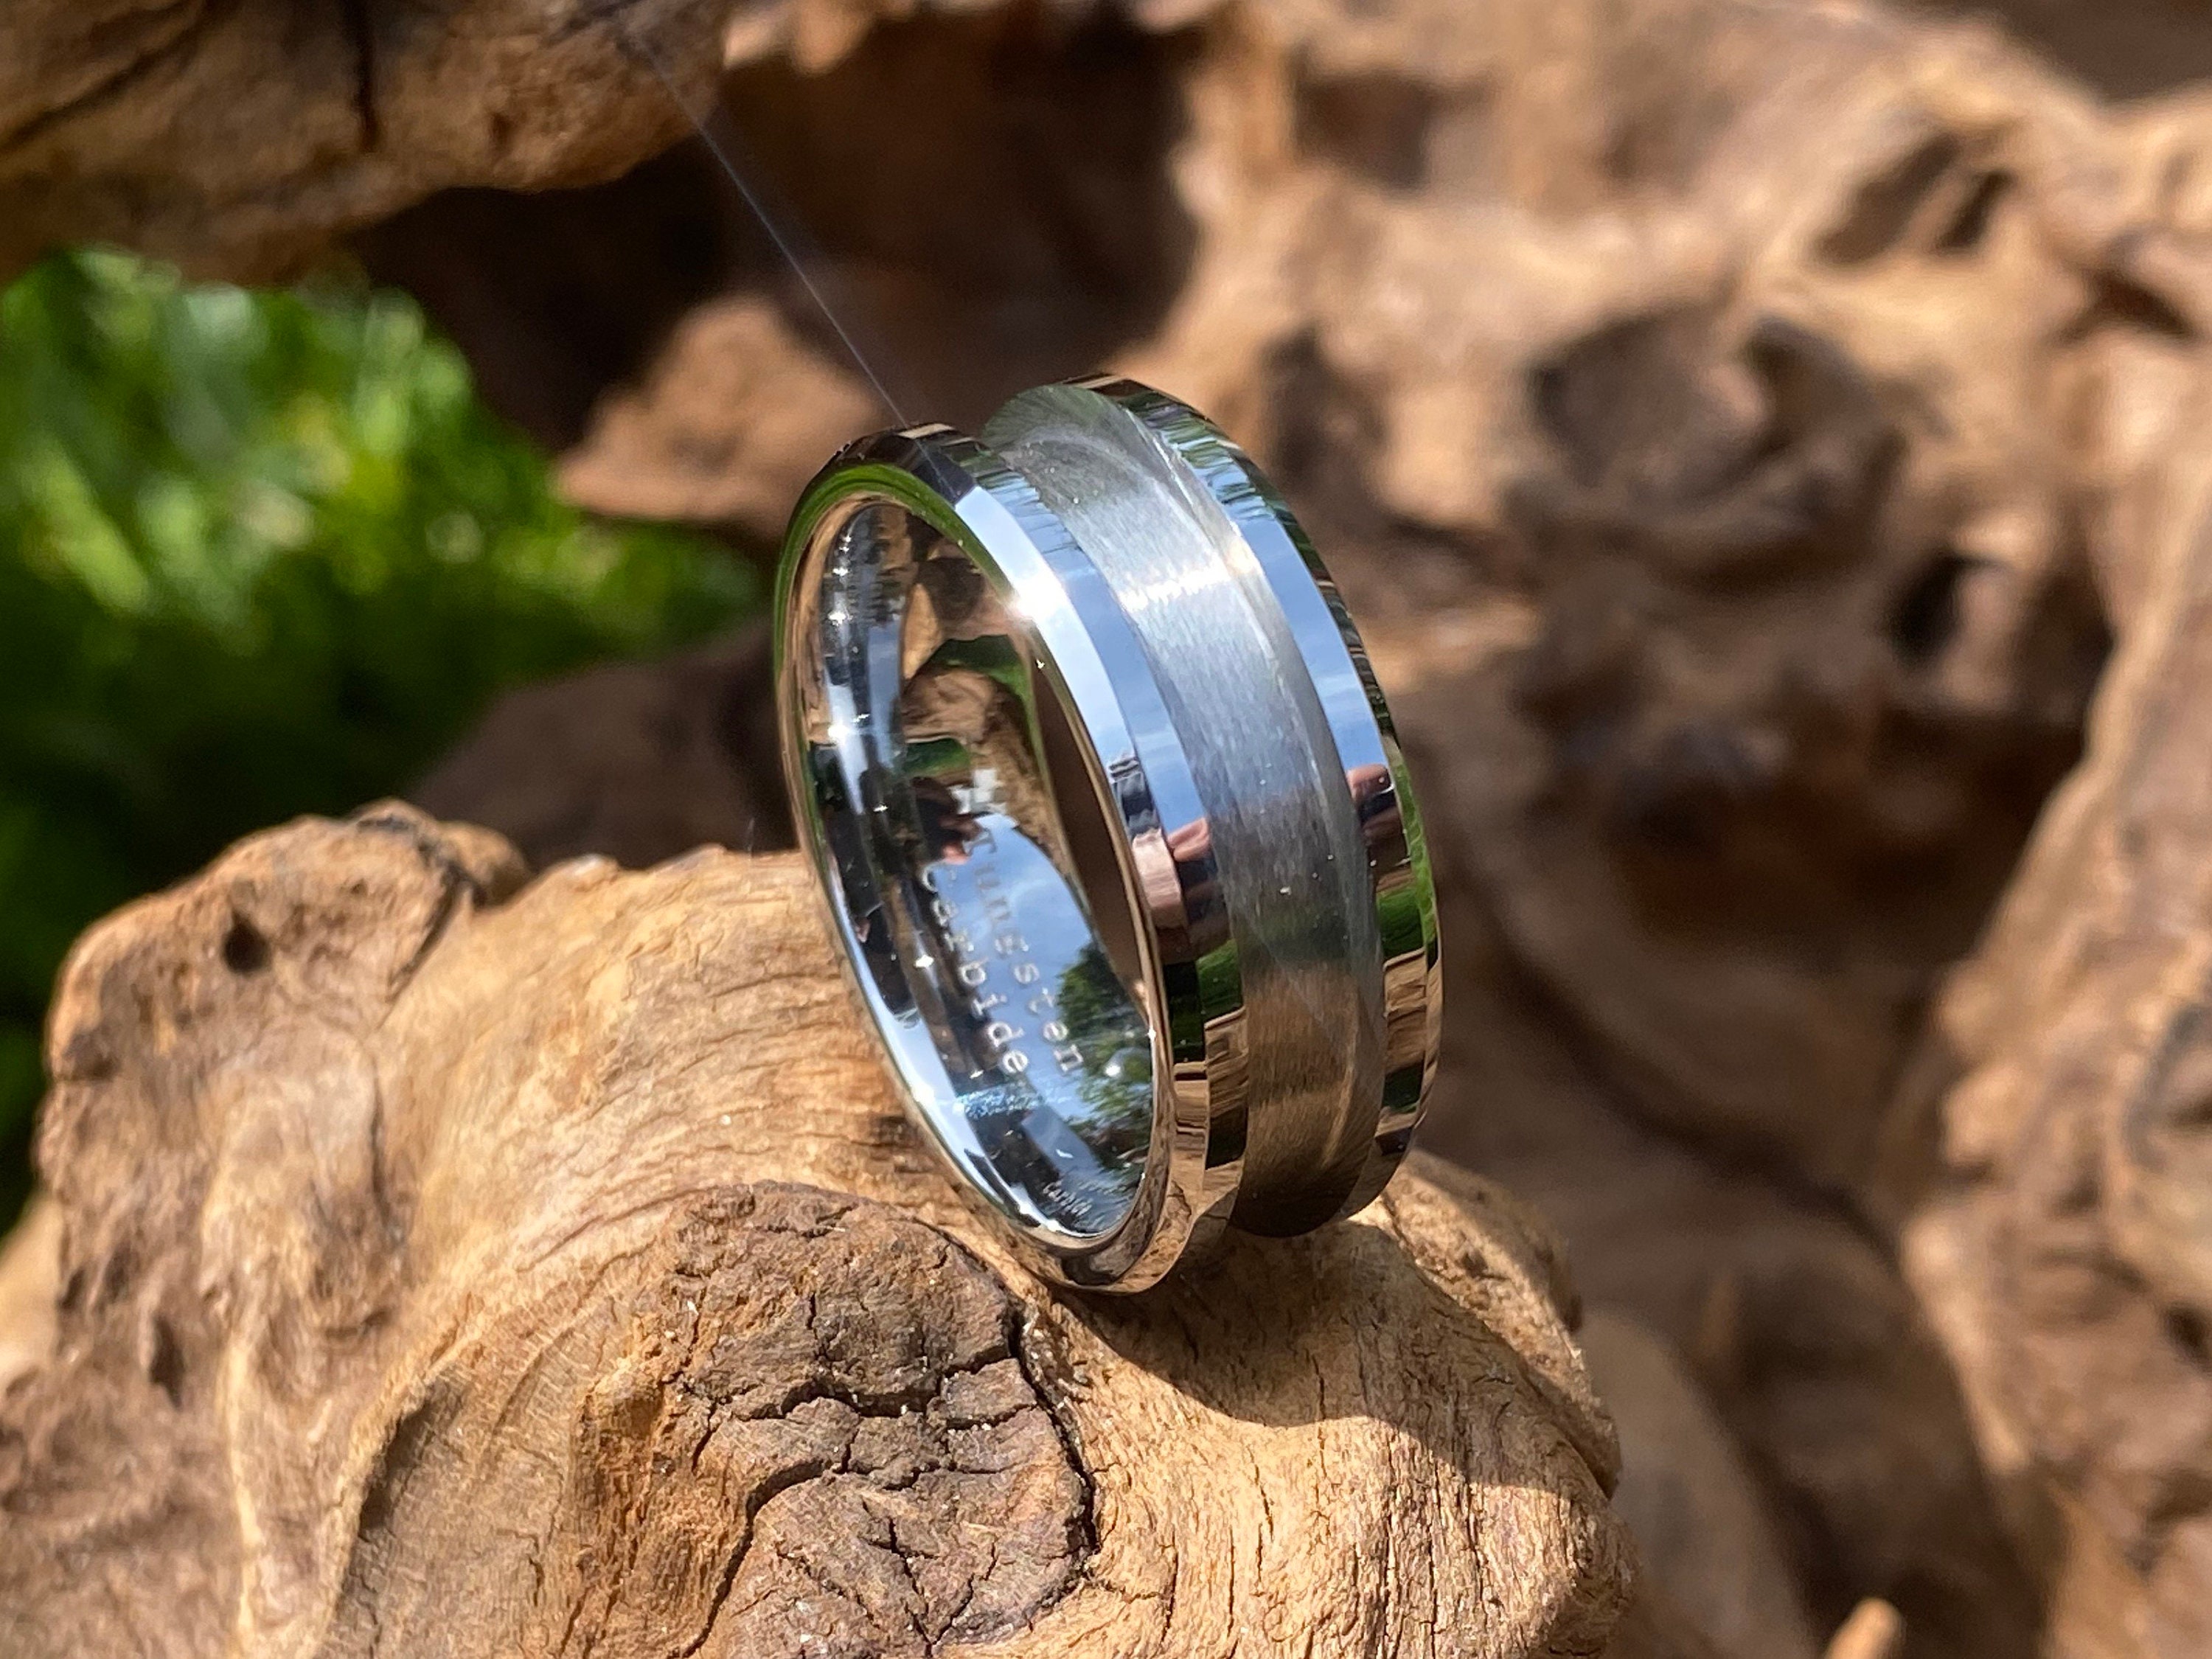 Ring Core Blank Sterling Silver Beveled Edge for Inlay 9.5 / 8mm